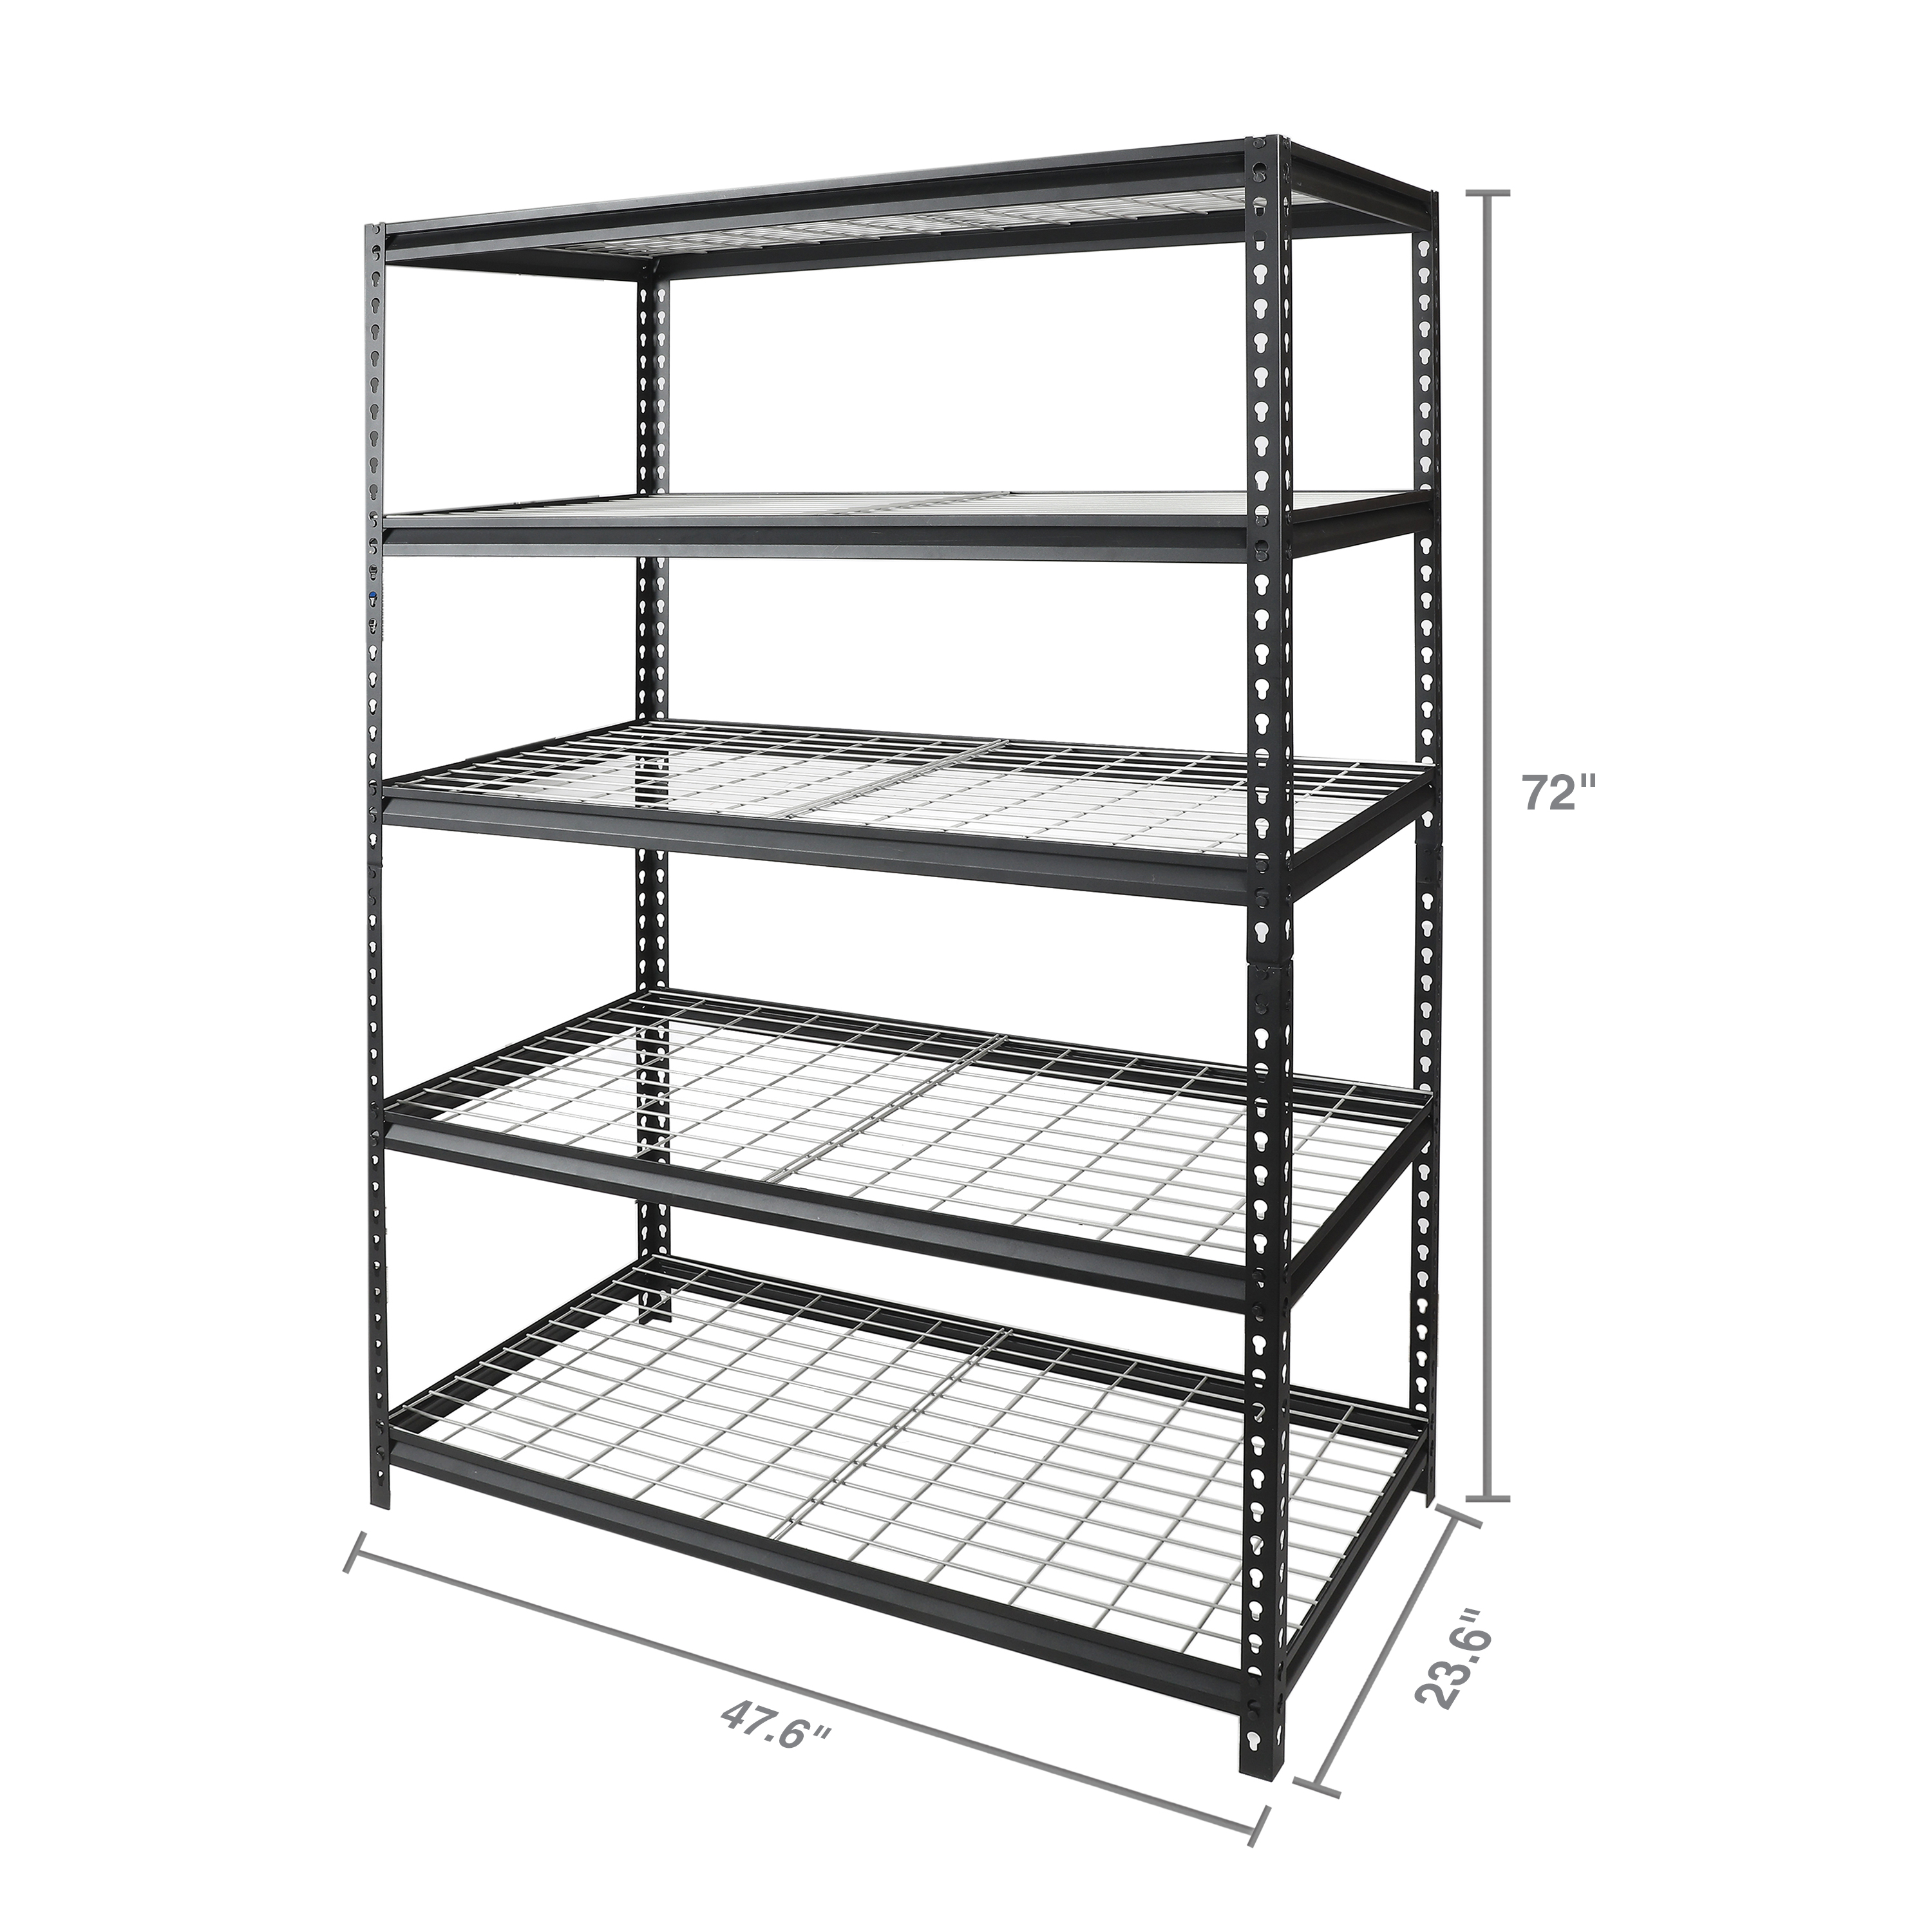 WORKPRO 48-Inch W x 24-Inch D x 72-Inch H 5-Shelf Freestanding Shelves, 4000 lbs. Capacity, Adult - image 5 of 11